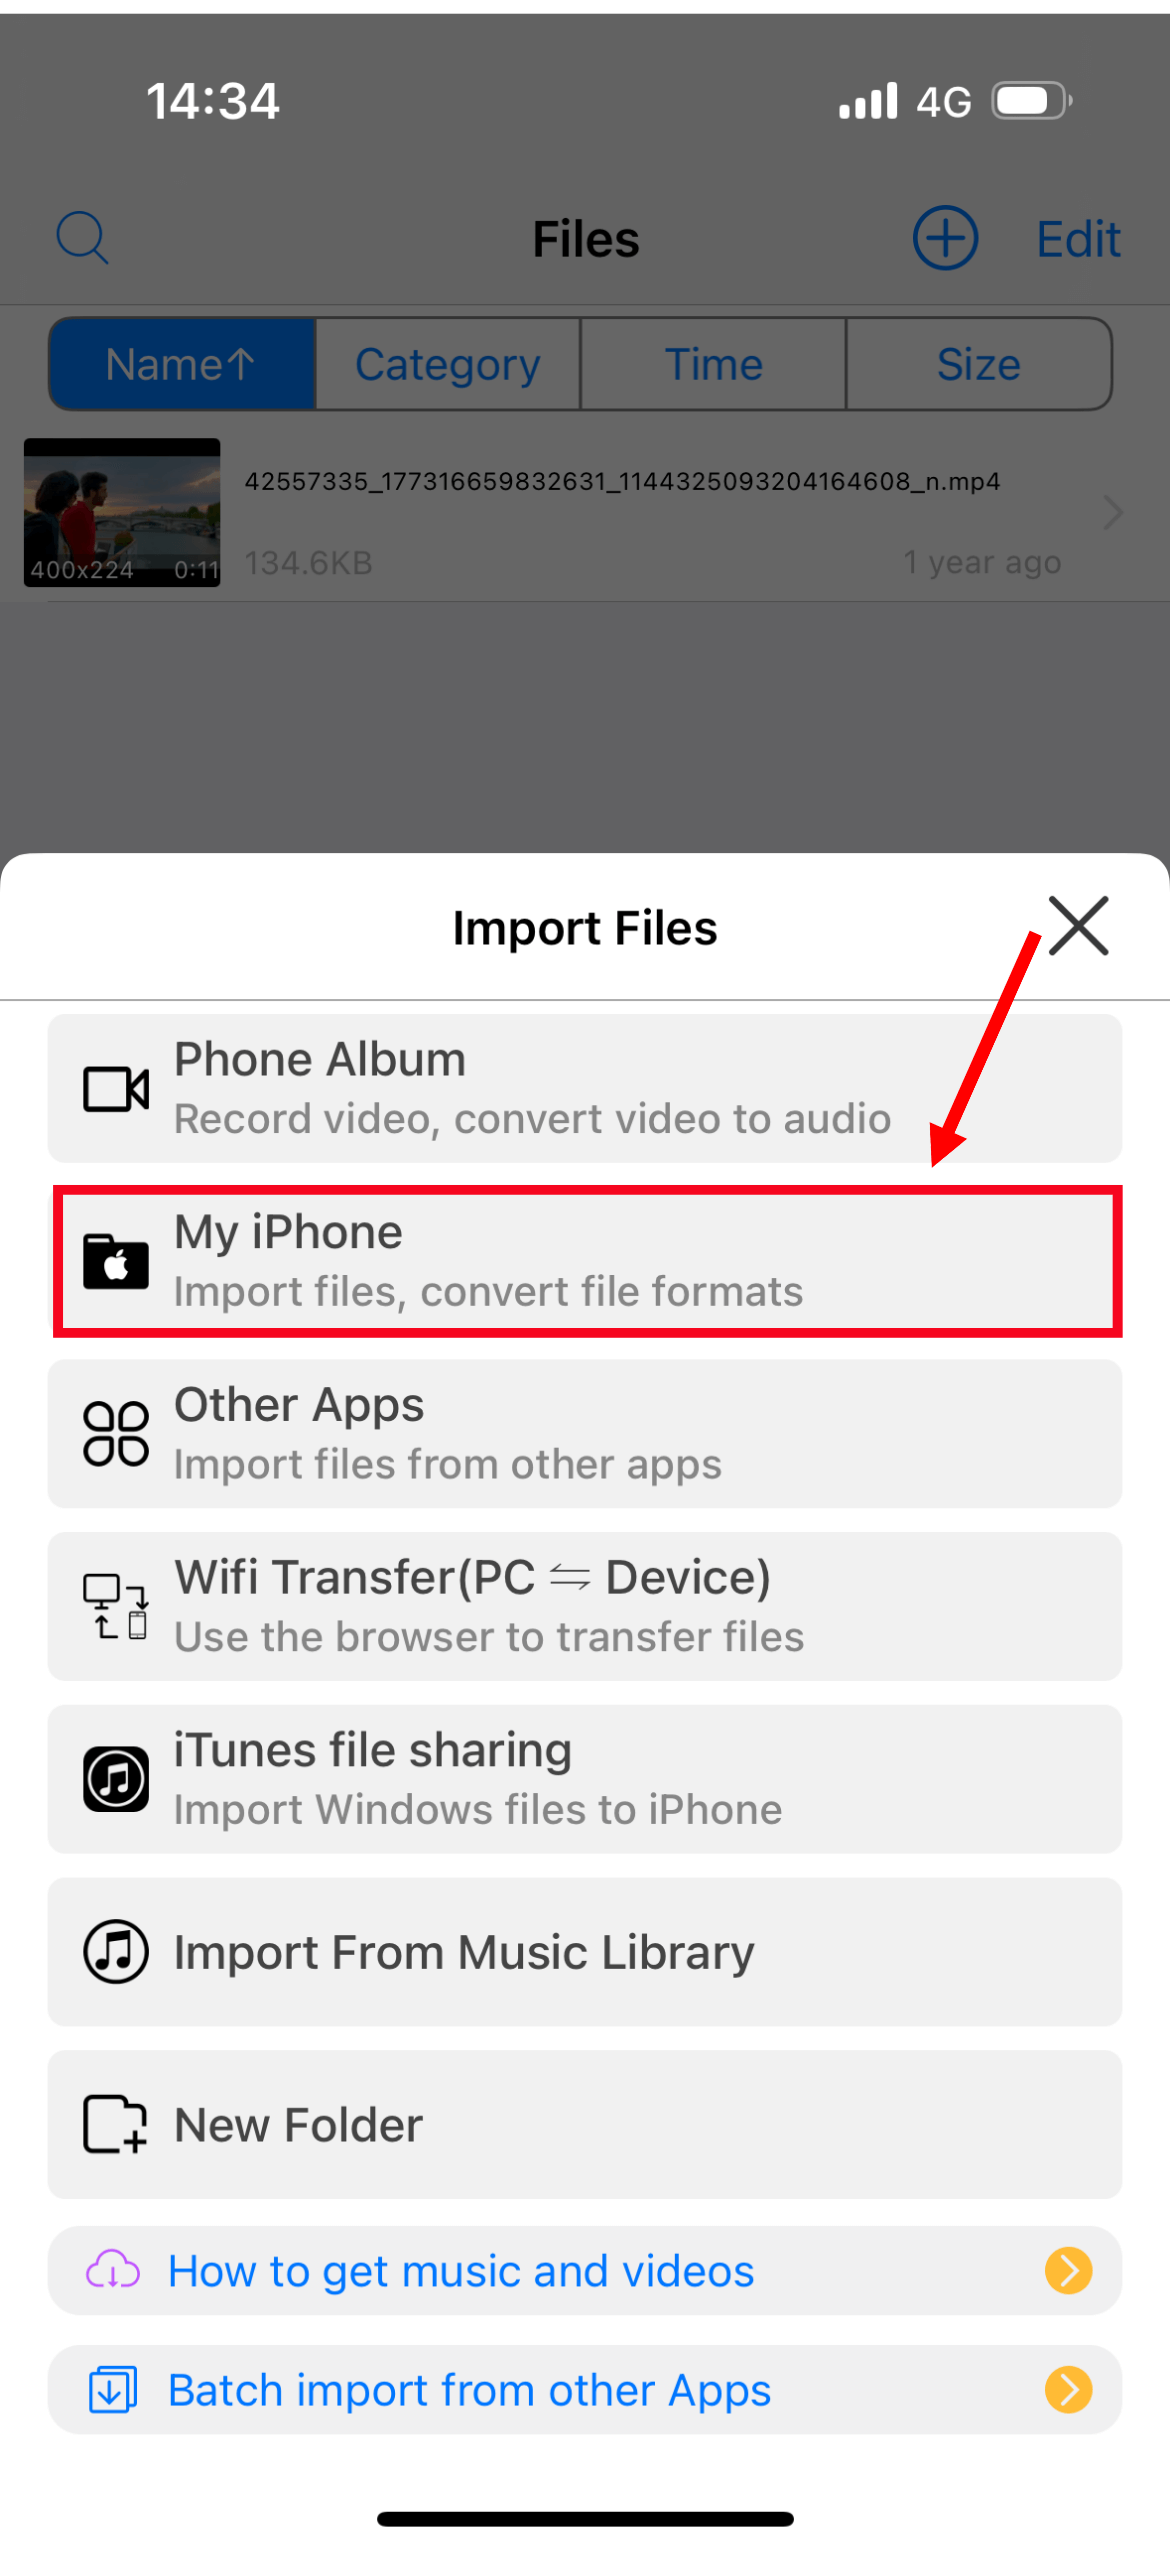 Click Import Files followed by My iPhone